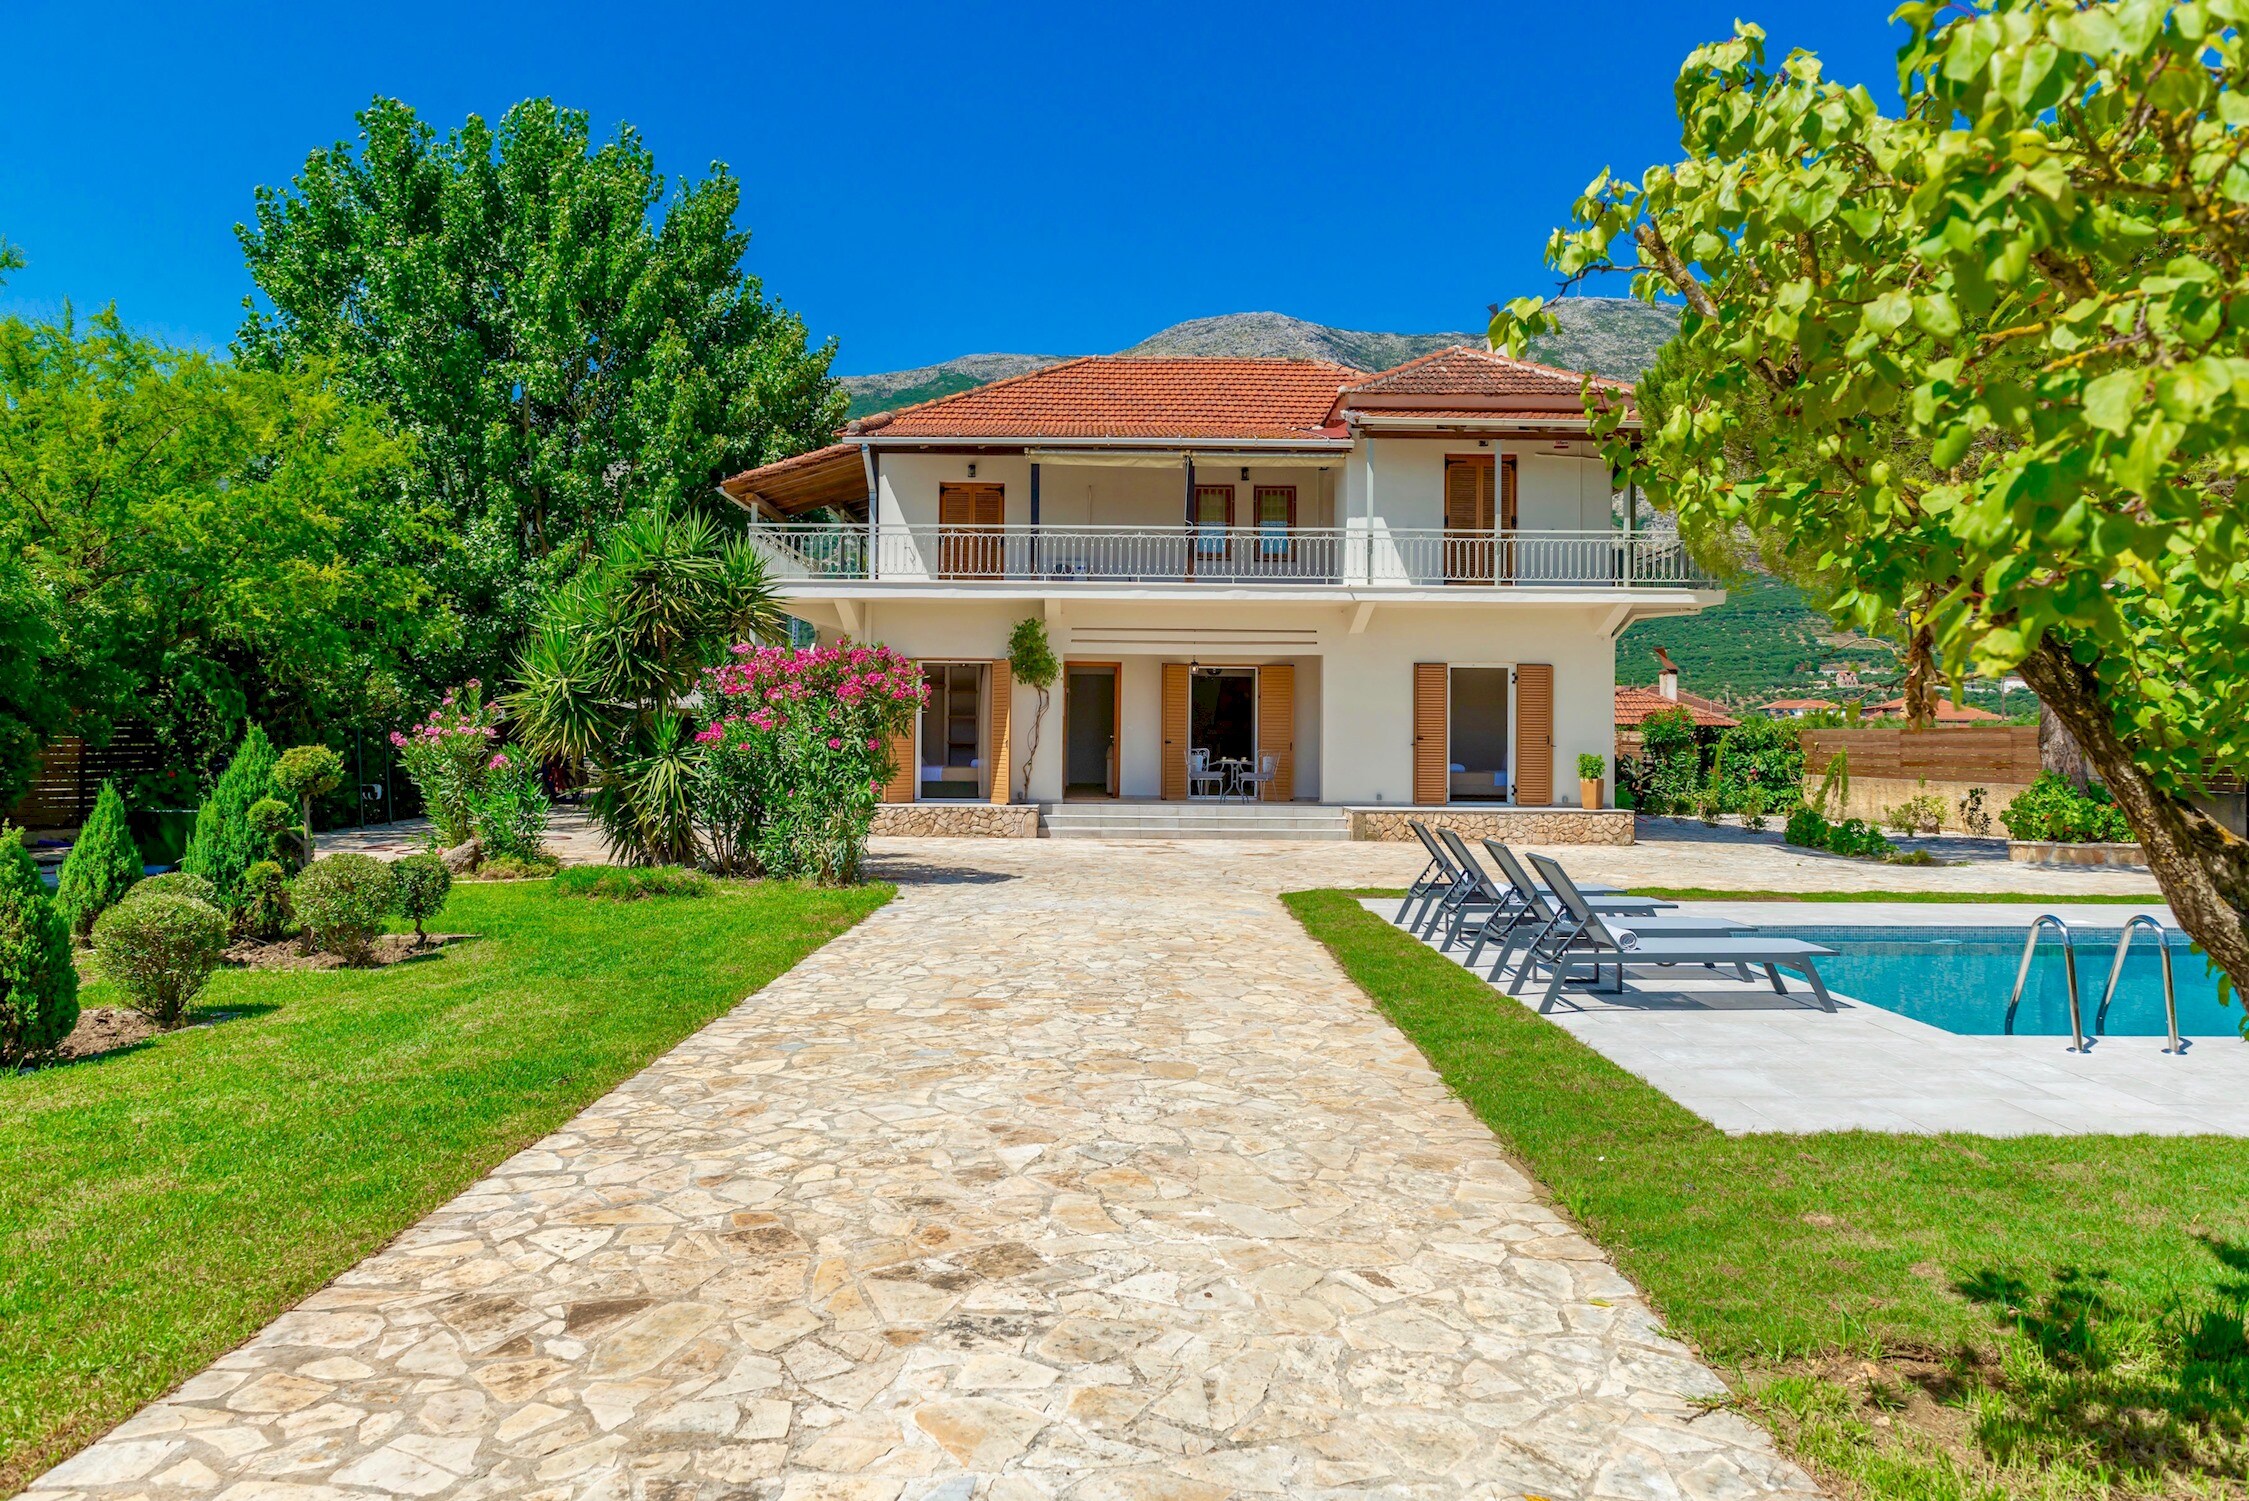 Property Image 2 - Superb Classy Villa with Big Garden in Alikes